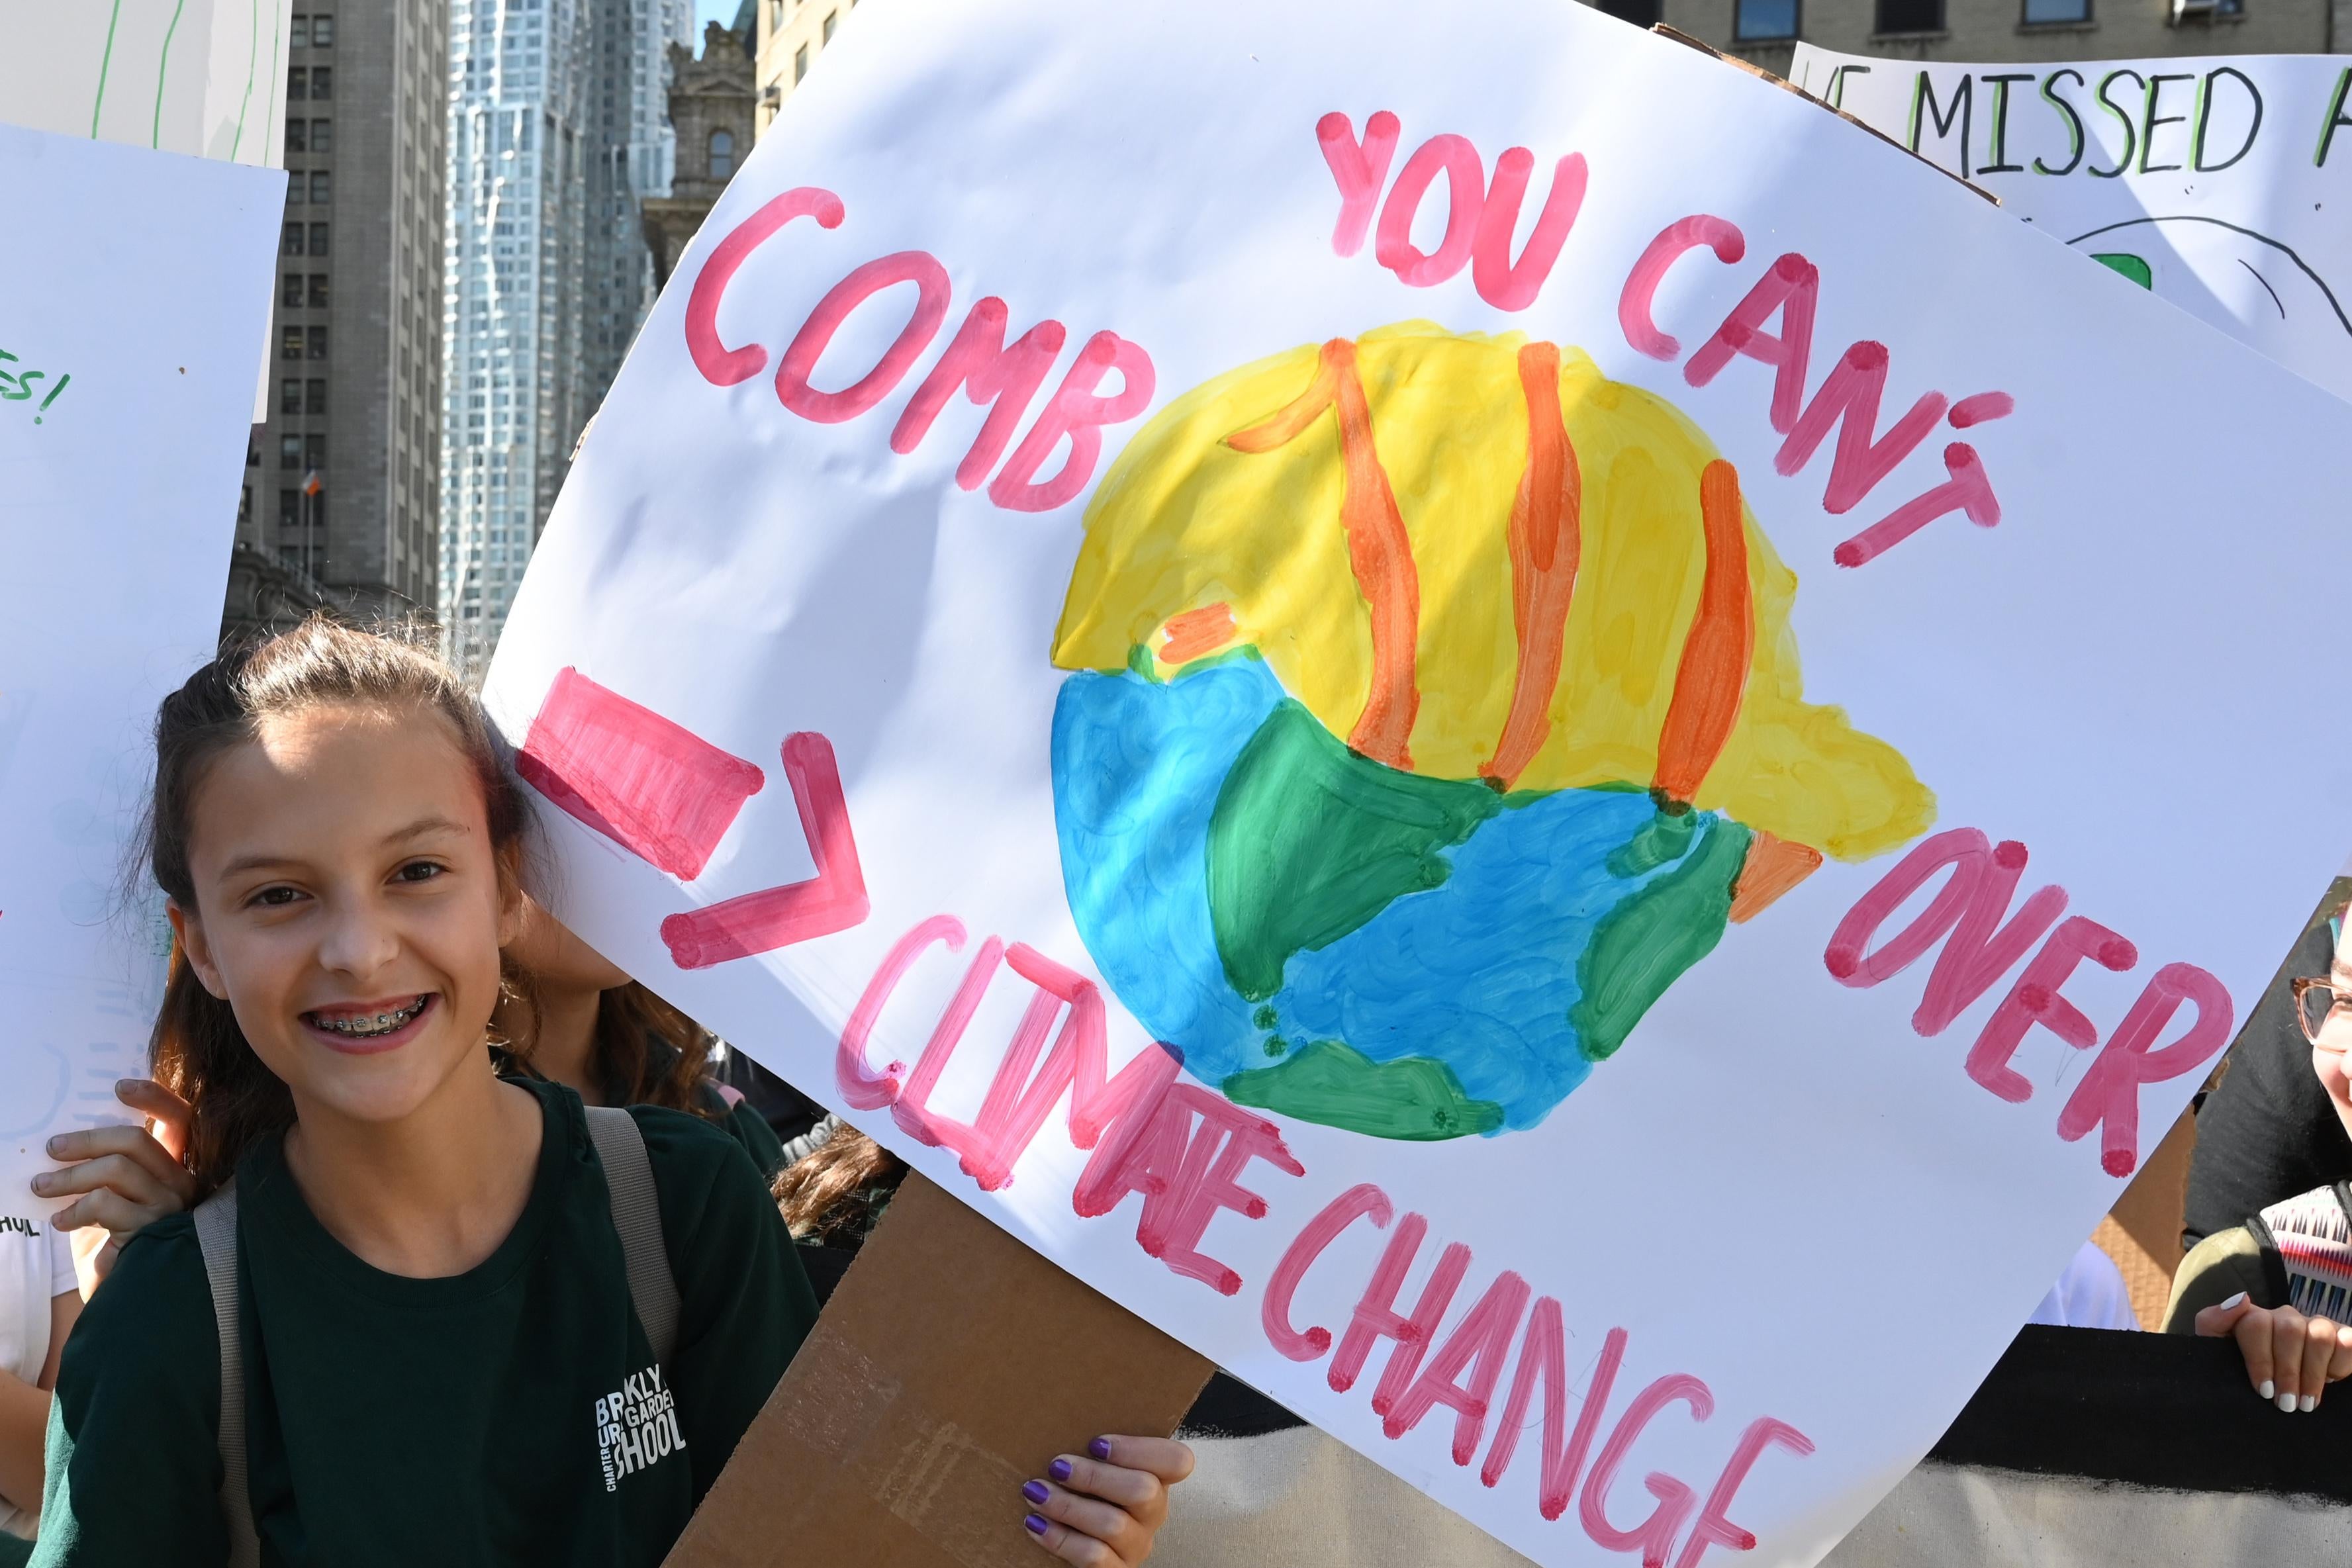 A student holds up a sign that says "you can't comb over climate change."